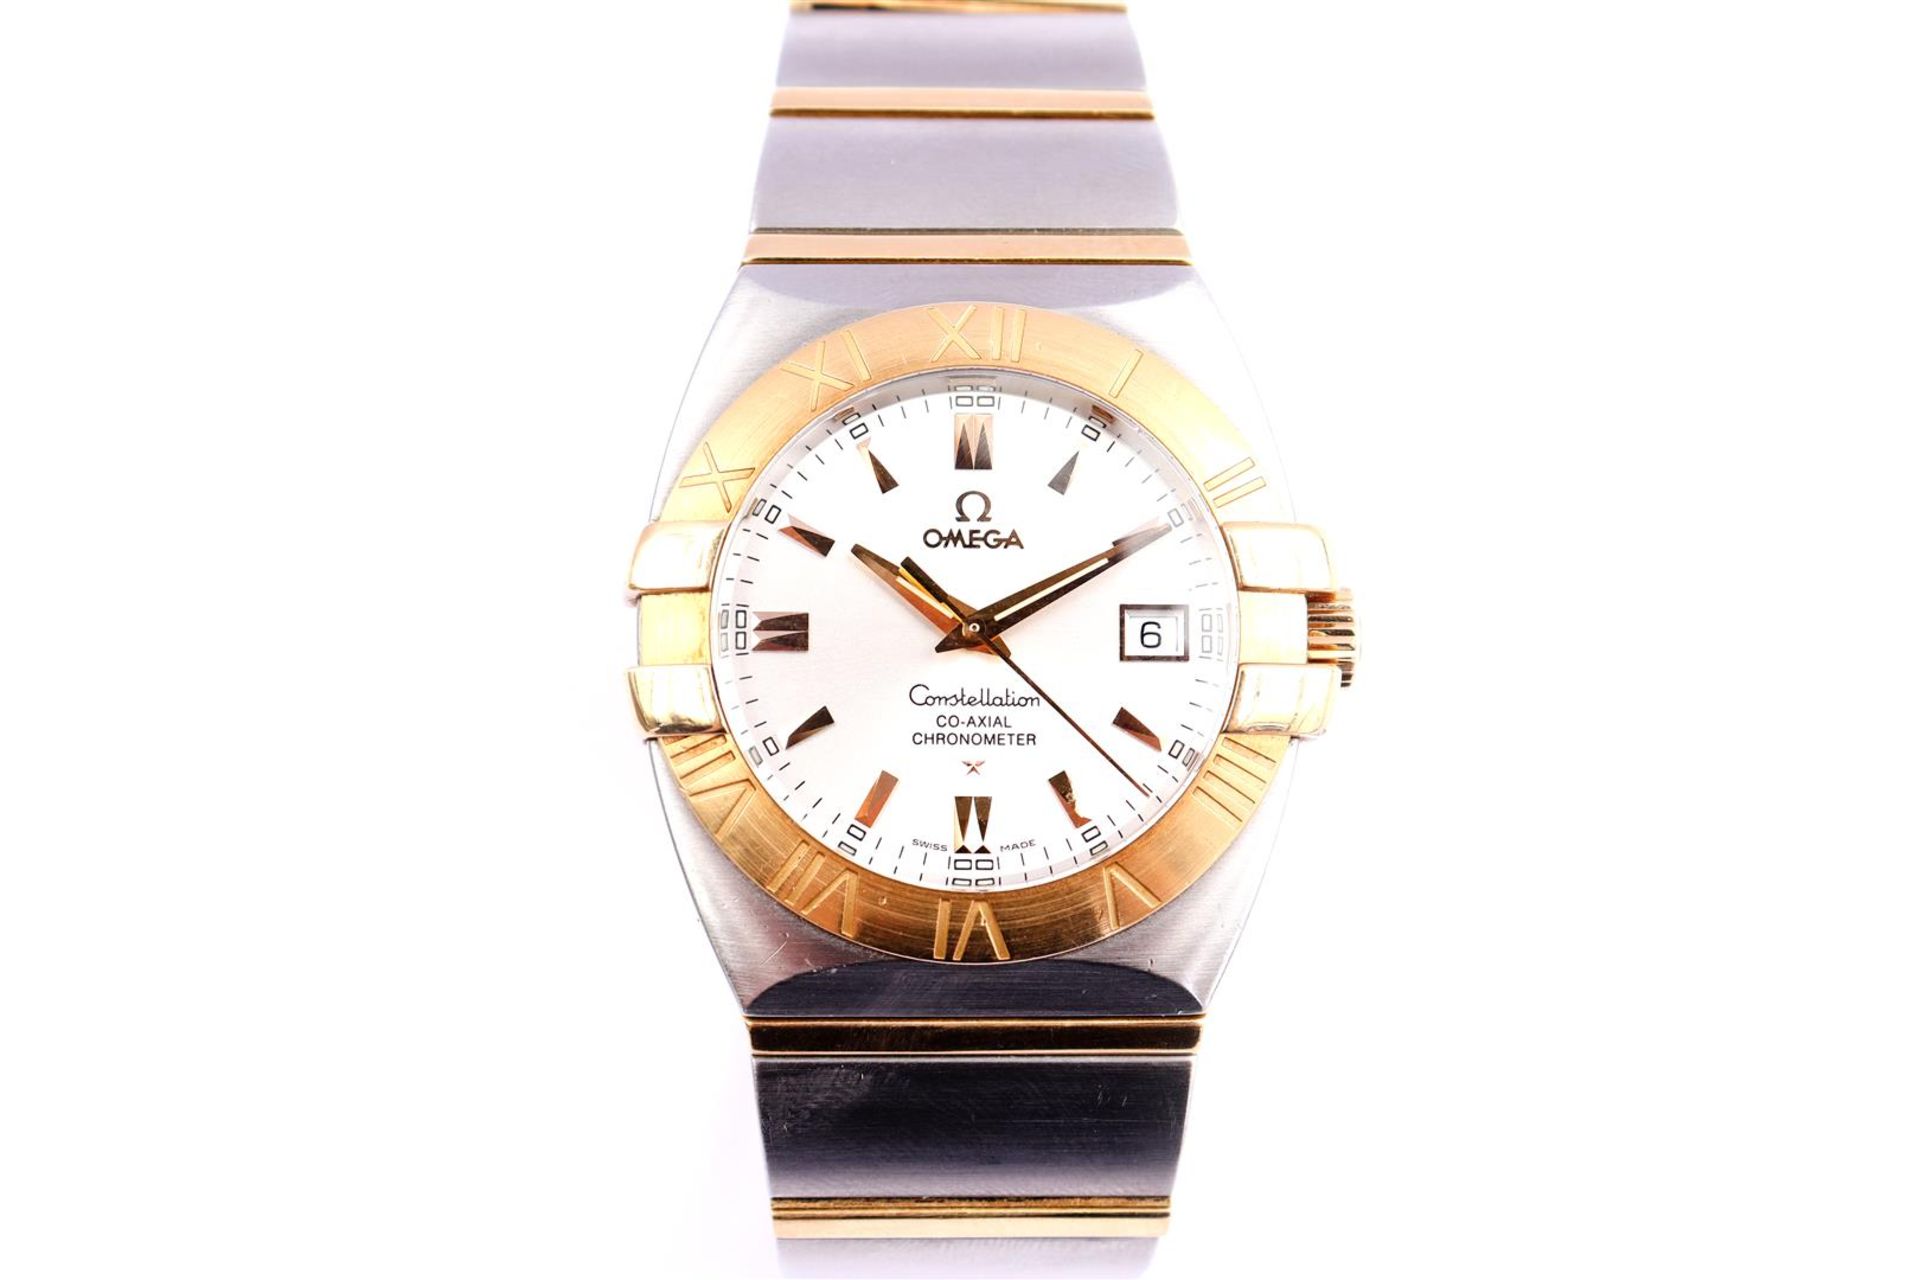 Omega Constellation Co-Axial chronometer men's wristwatch